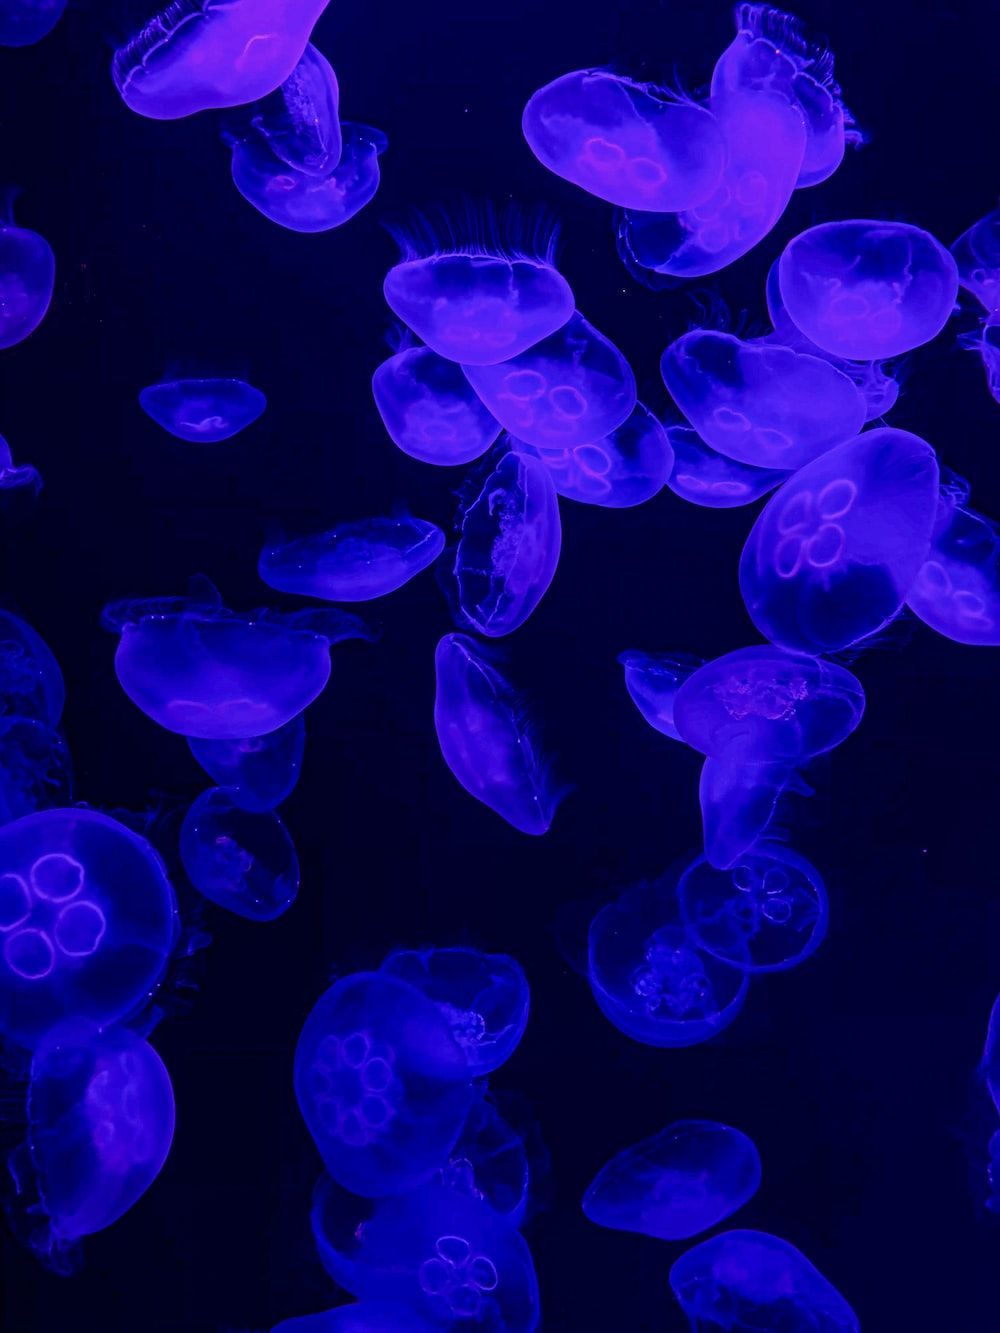 Purple Jellyfish Picture. Download Free Image